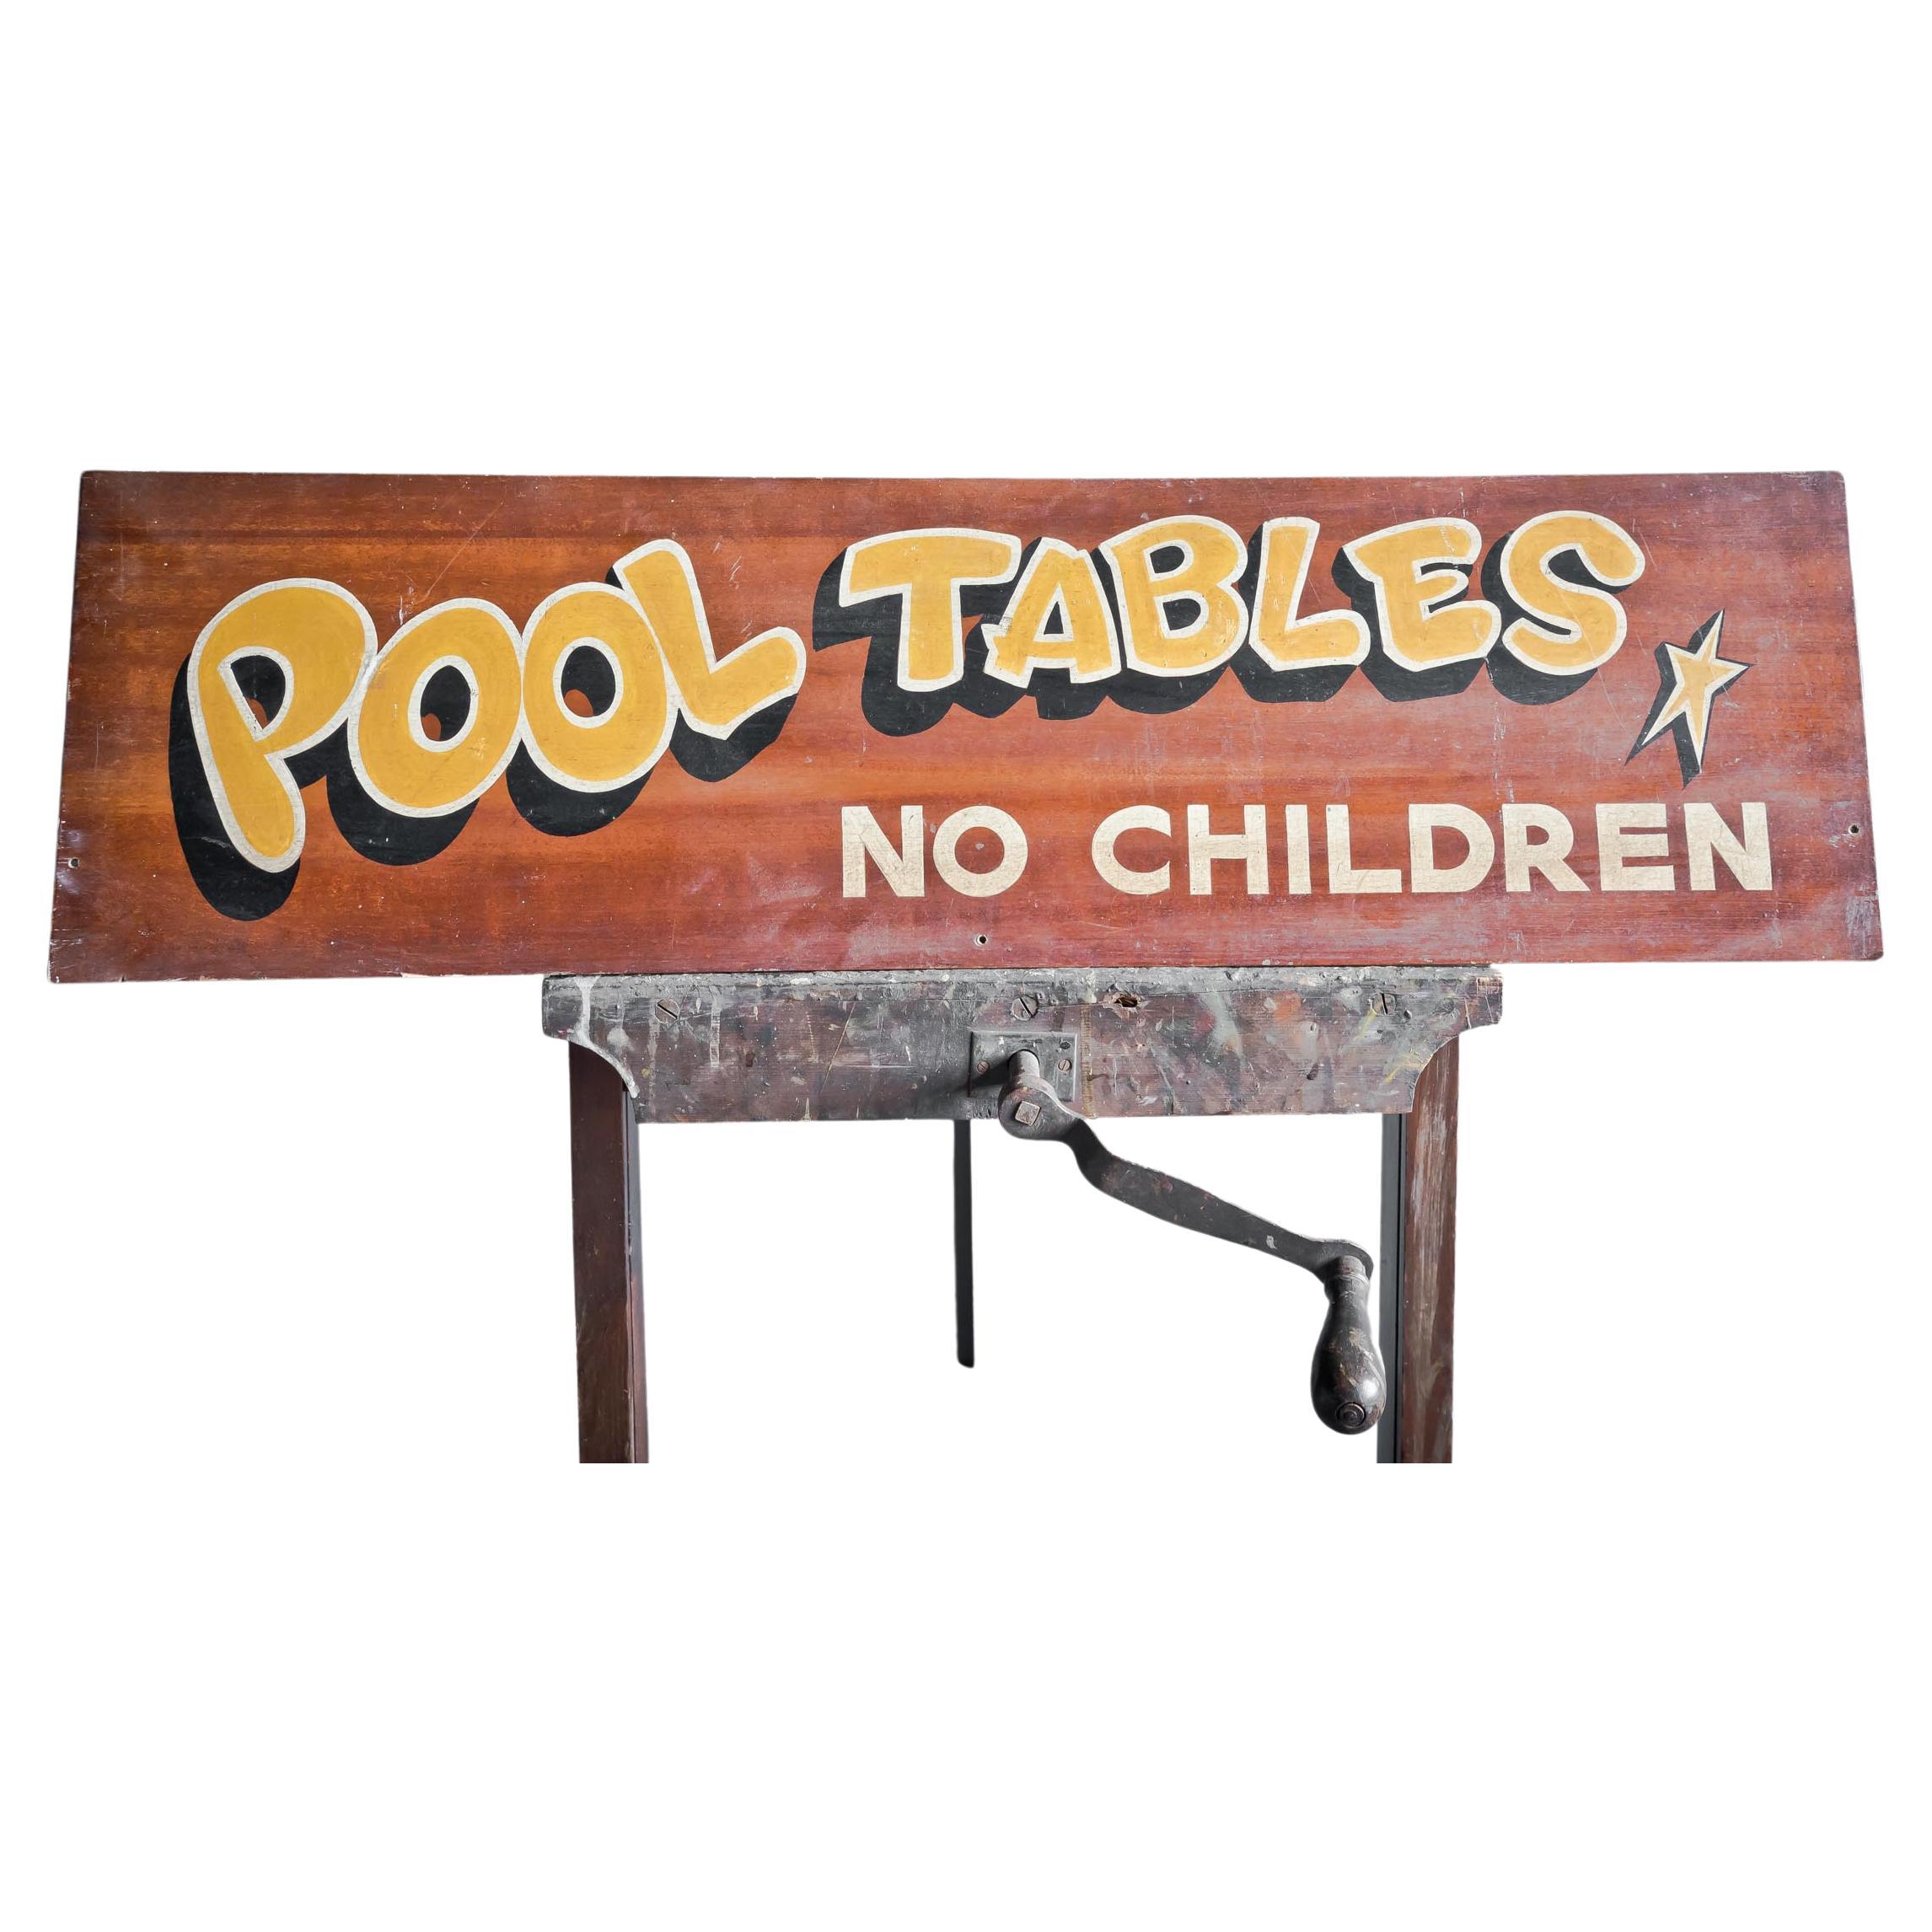 No Children Hand Painted Sign For Sale